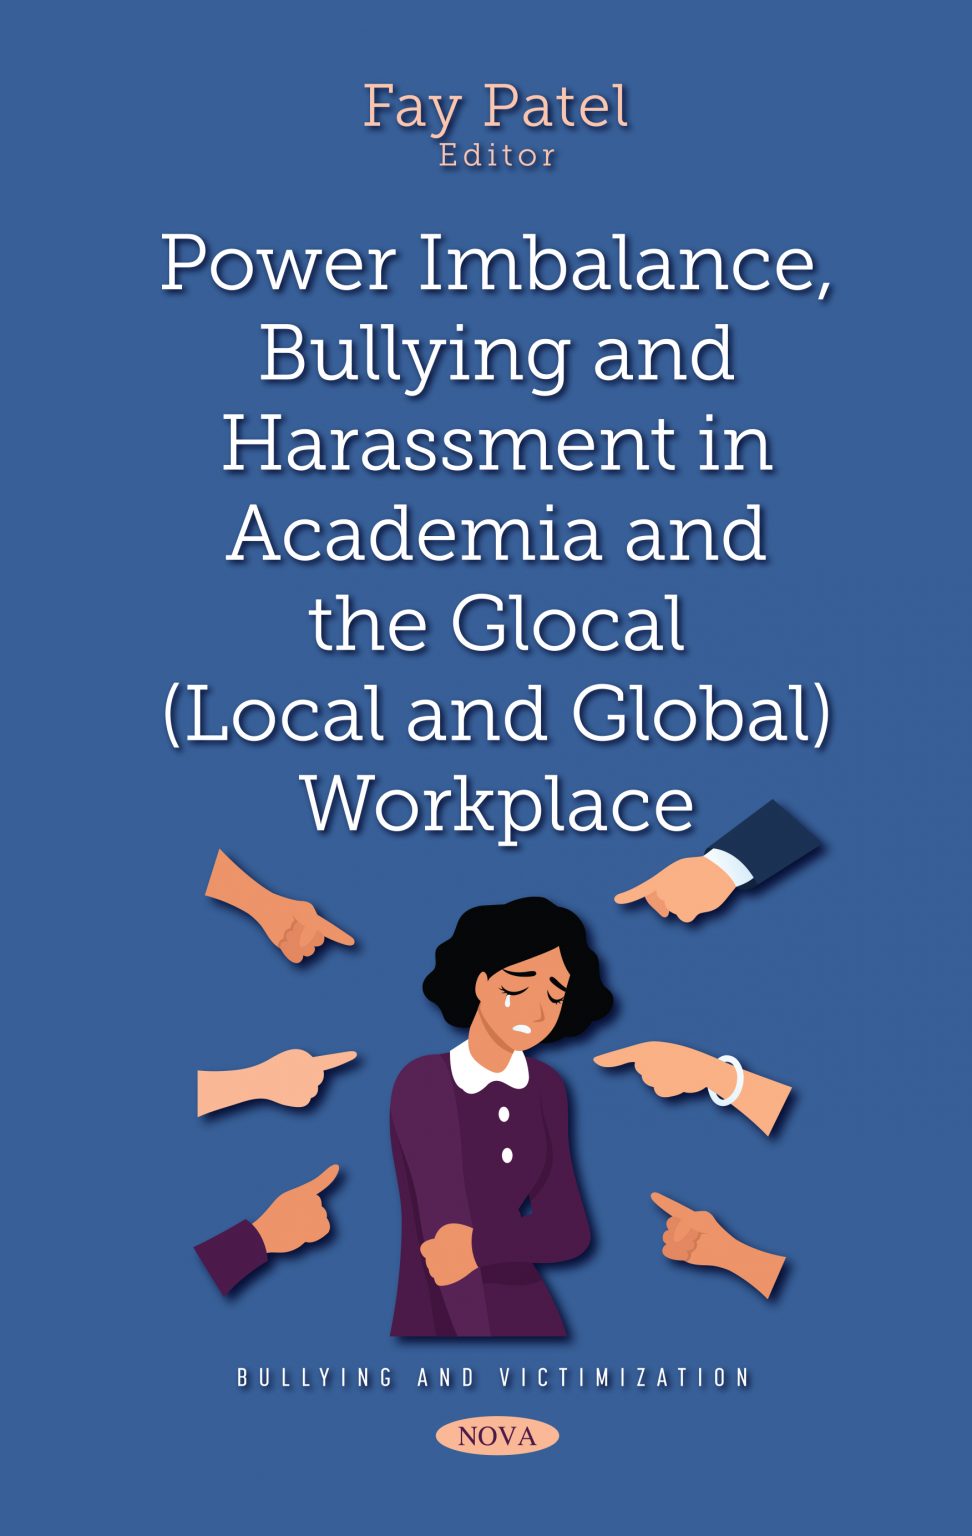 Power Imbalance, Bullying and Harassment in Academia and the Glocal (Local and Global) Workplace